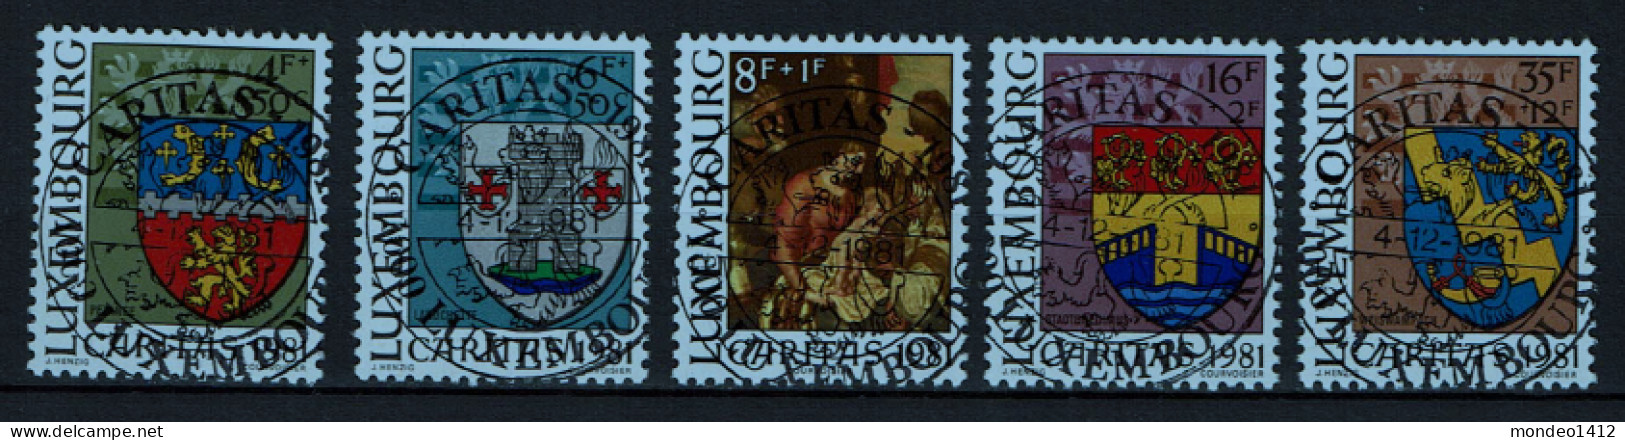 Luxembourg 1981 - YT 991/995 - Town Arms - Caritas Issue, Armoiries Communales, Wappenschilde, Tableau - Gebraucht